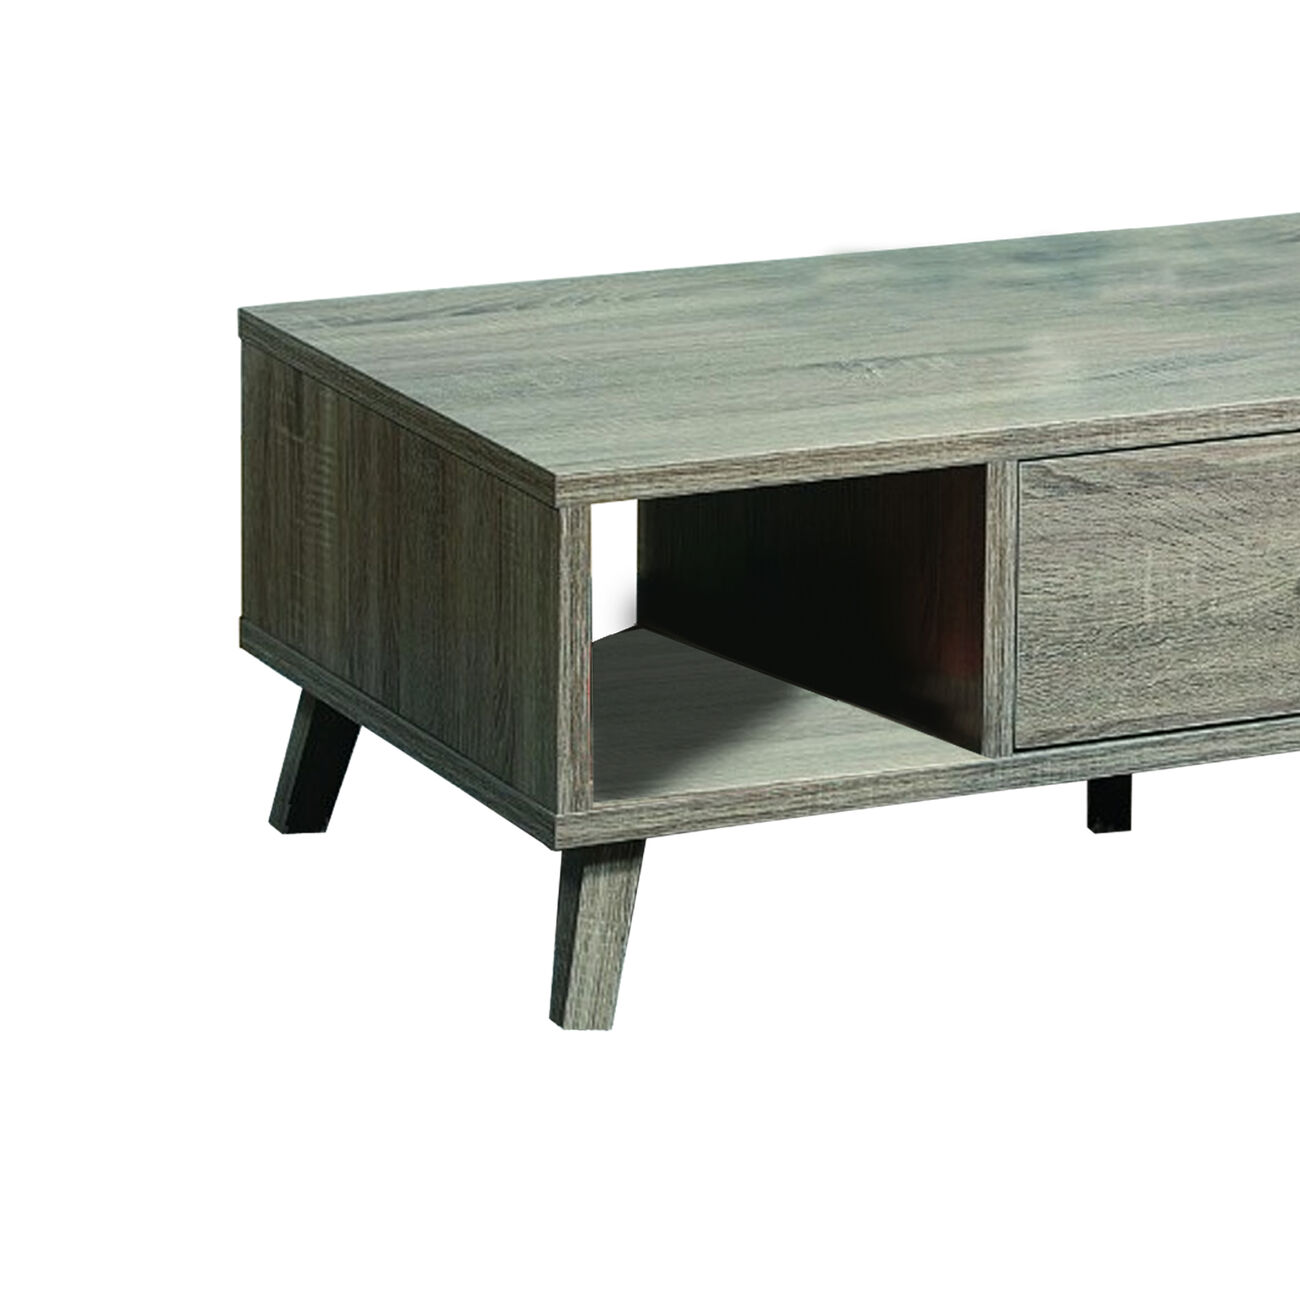 Elegant Wooden Coffee Table With Drawer, Gray